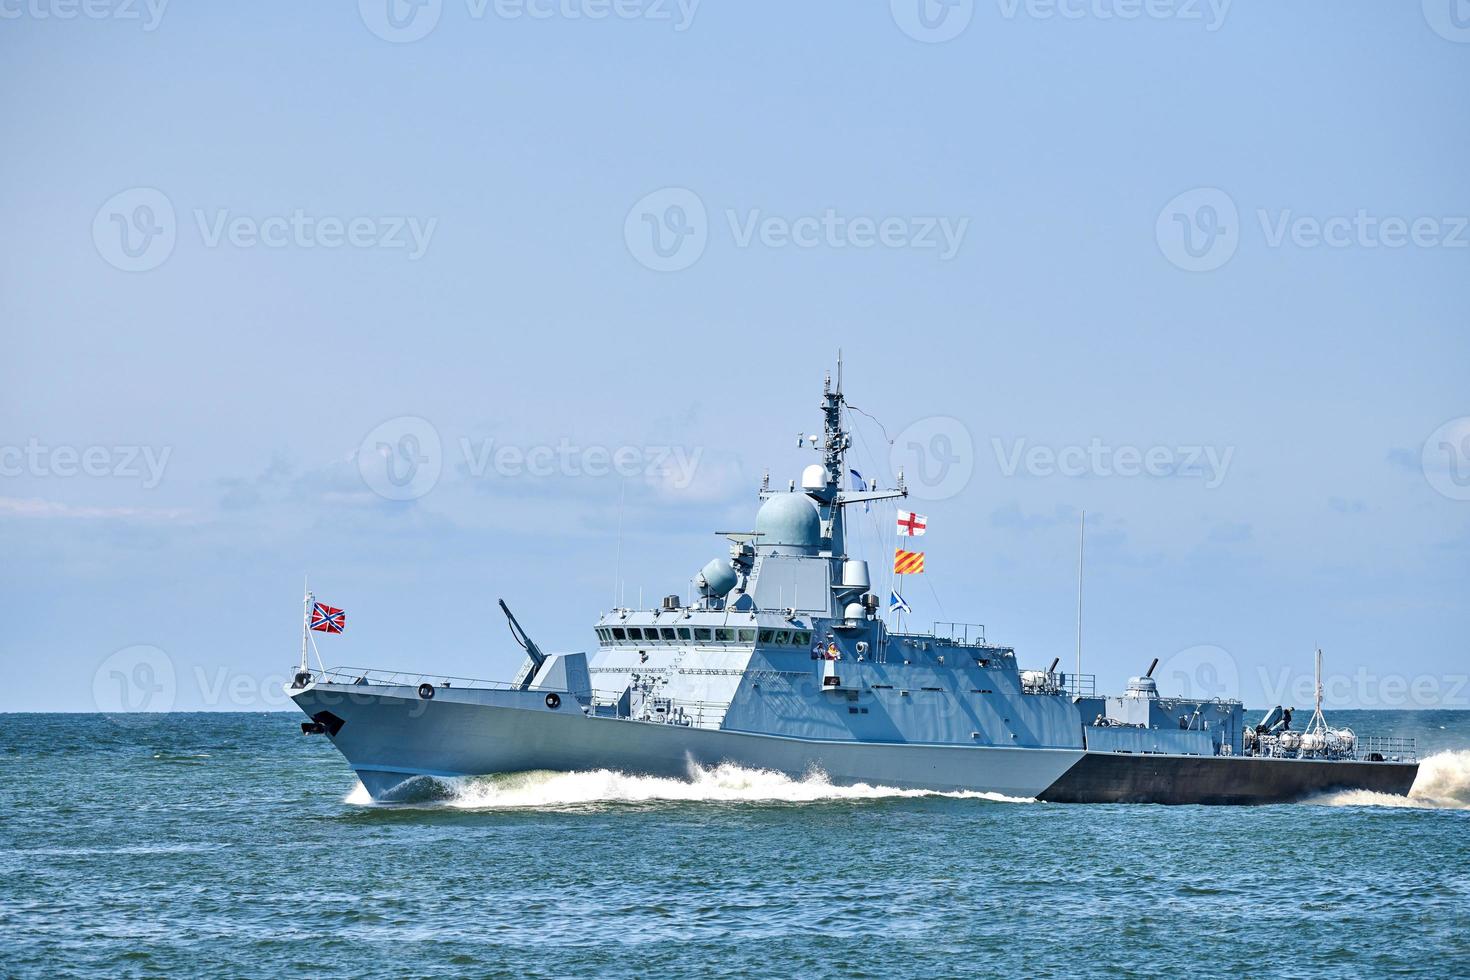 Missile boat during naval exercises and parade, guided missile destroyer in Baltic Sea, warship photo